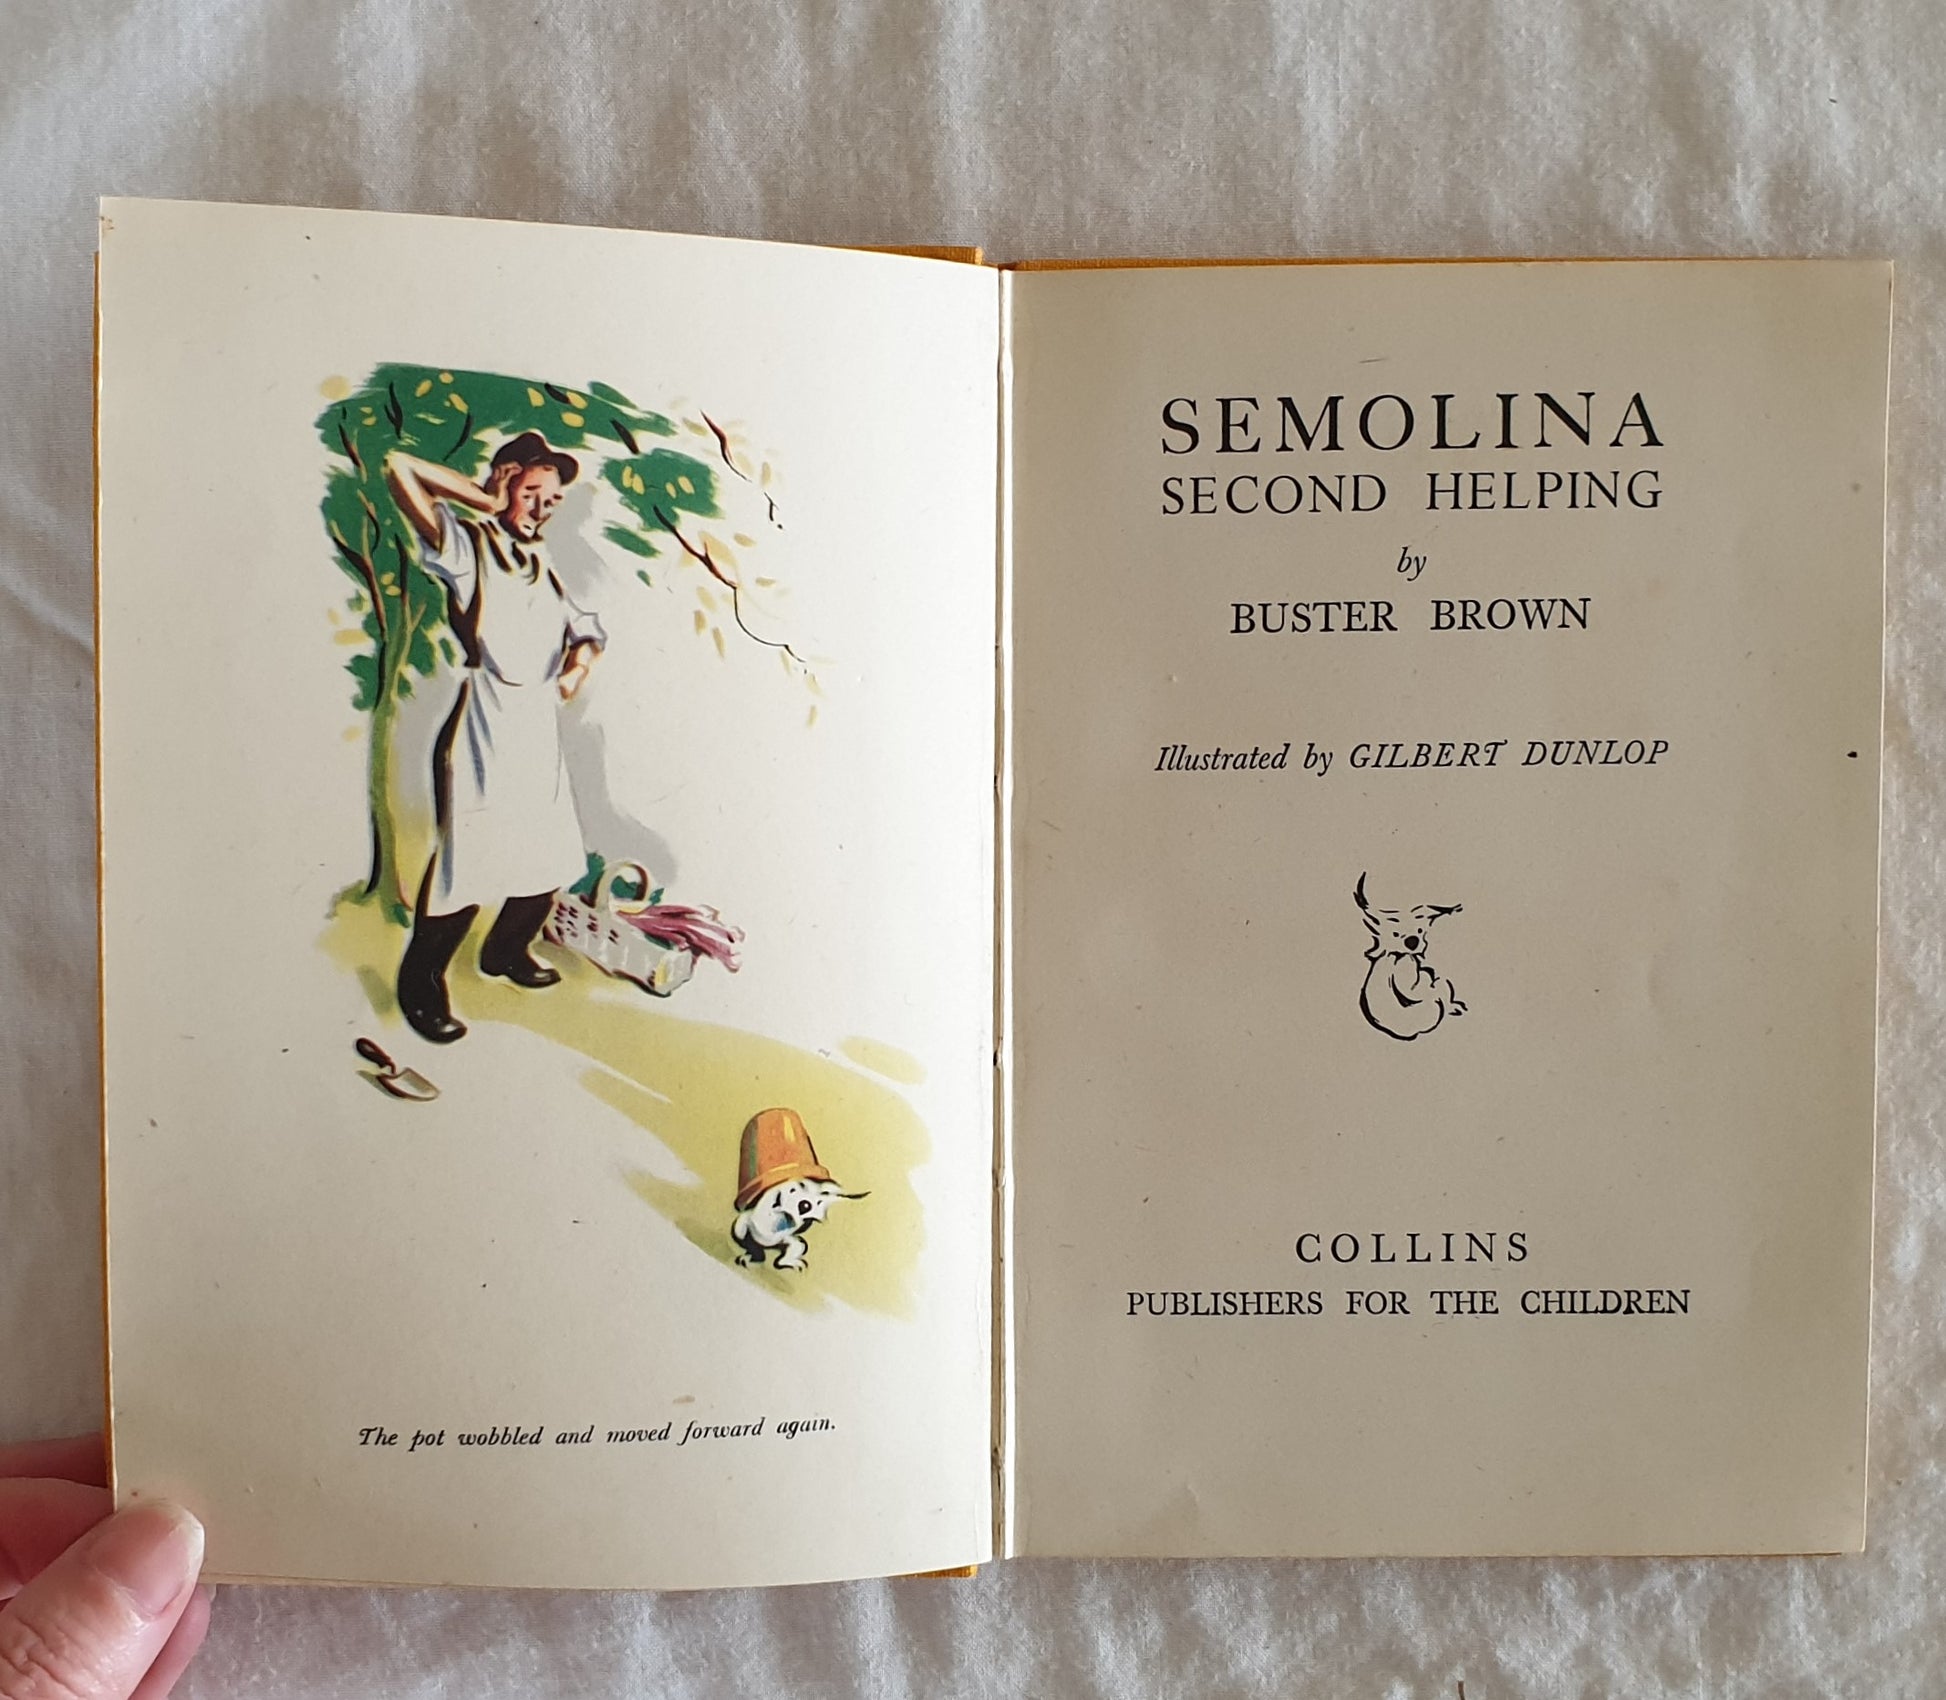 Semolina Second Helping  by Buster Brown